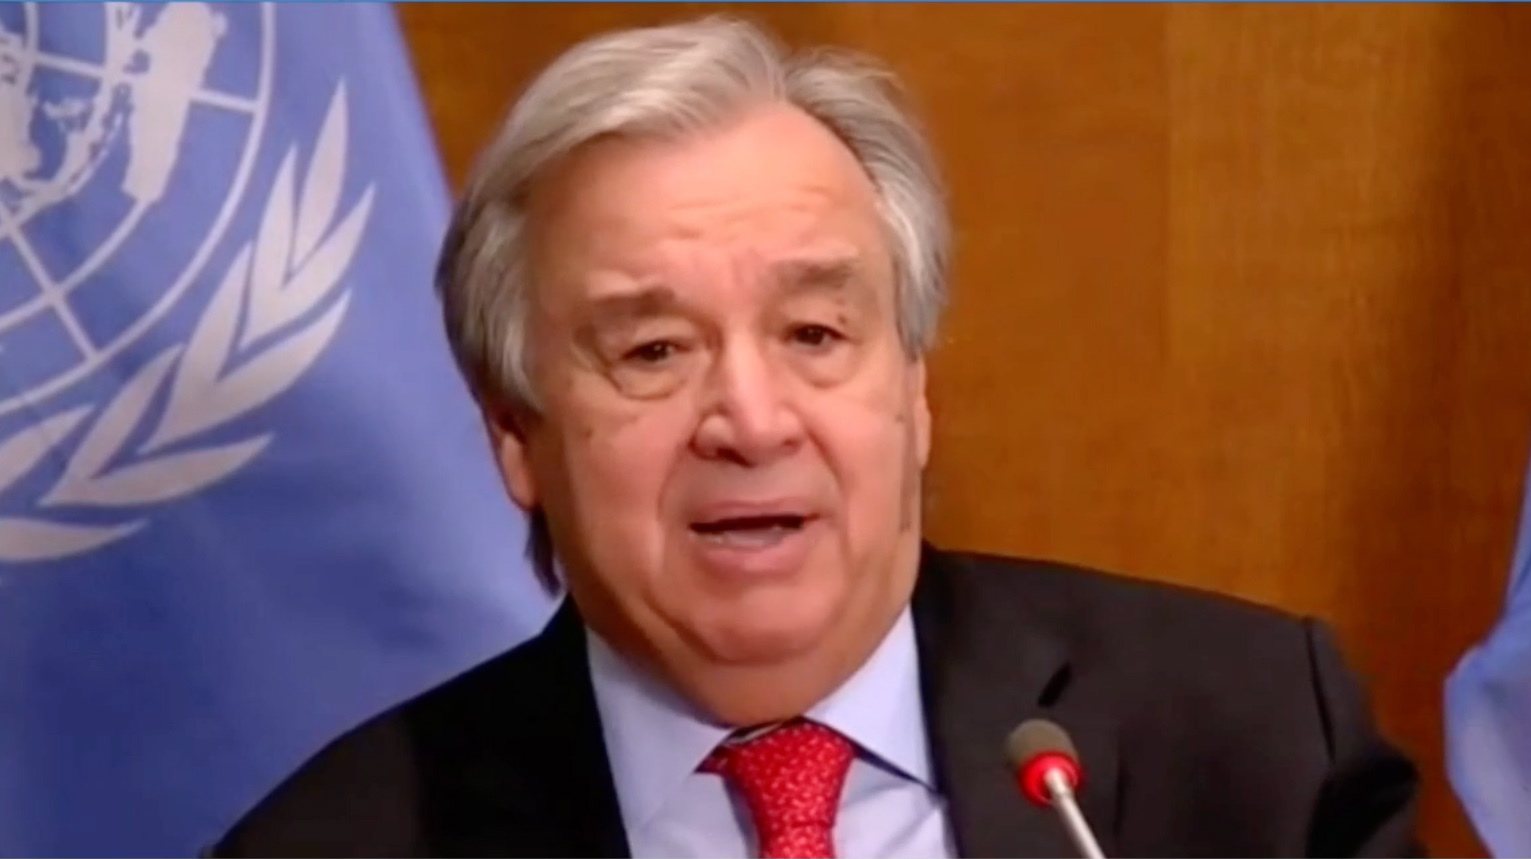 epa08964976 A still image obtained from a live video feed by the World Economic Forum (WEF) shows Secretary-General of the United Nations Antonio Guterres as he delivers Special Address during a virtual meeting of the World Economic Forum, 25 January 2021. The World Economic Forum (WEF) was scheduled to take place in Davos. Due to the Coronavirus outbreak, it will be held online in a digital format from January, 25-29.  EPA/PASCAL BITZ / WEF HANDOUT MANDATORY CREDIT / HANDOUT EDITORIAL USE ONLY/NO SALES